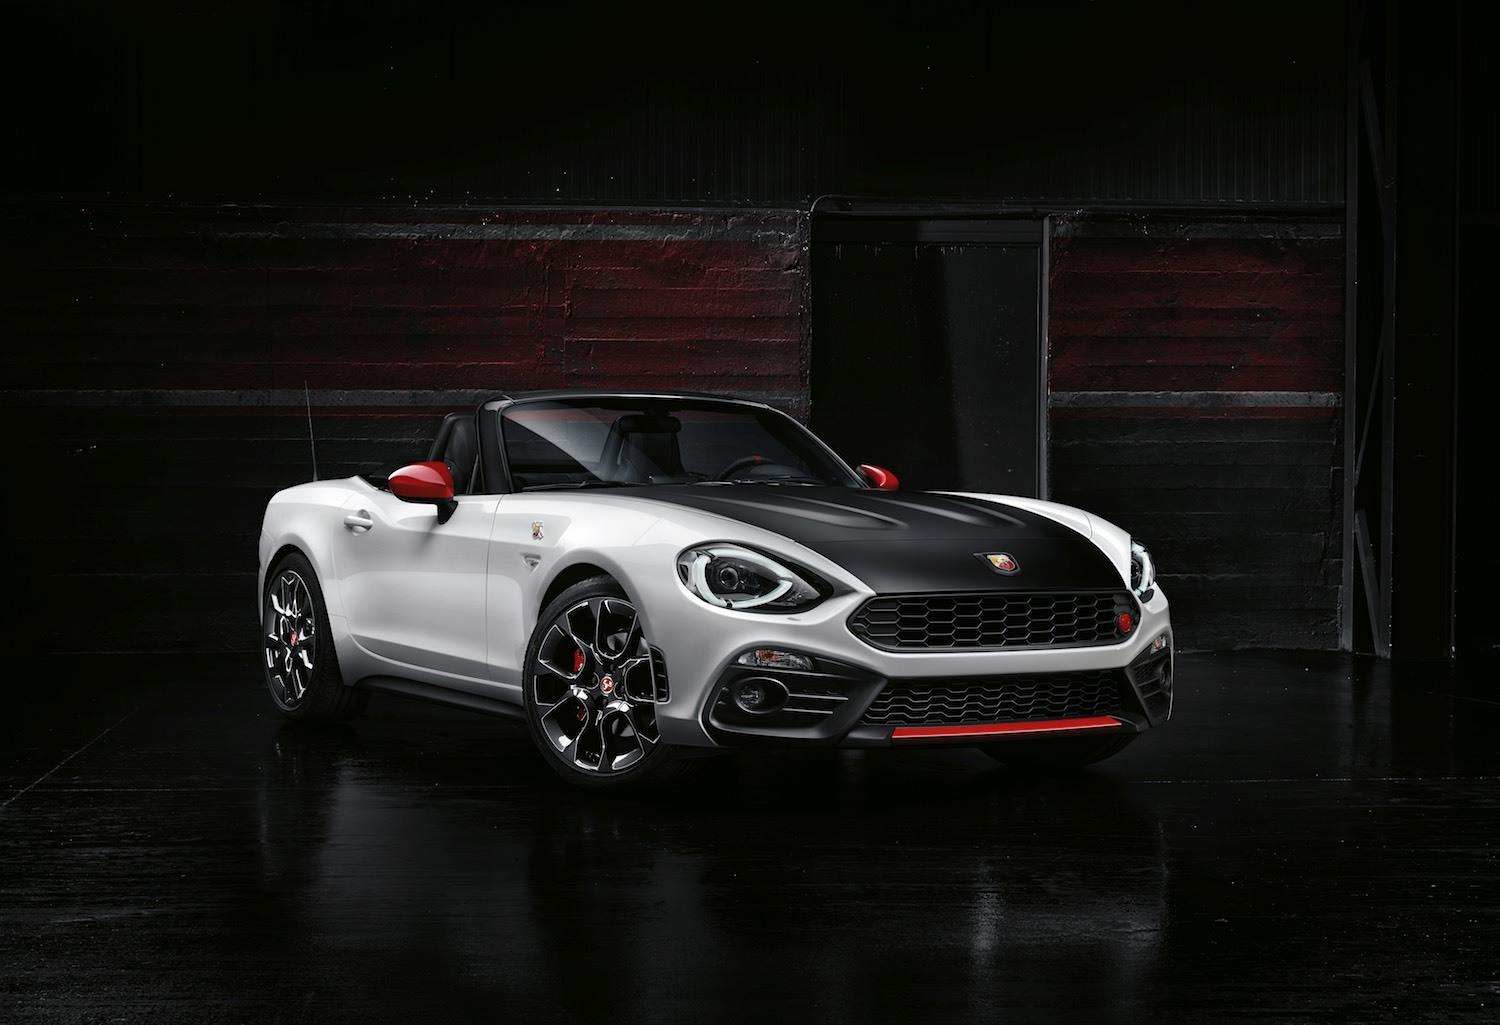 Jonathan Humphrey reviews the Abarth 124 Spider for Drive 1